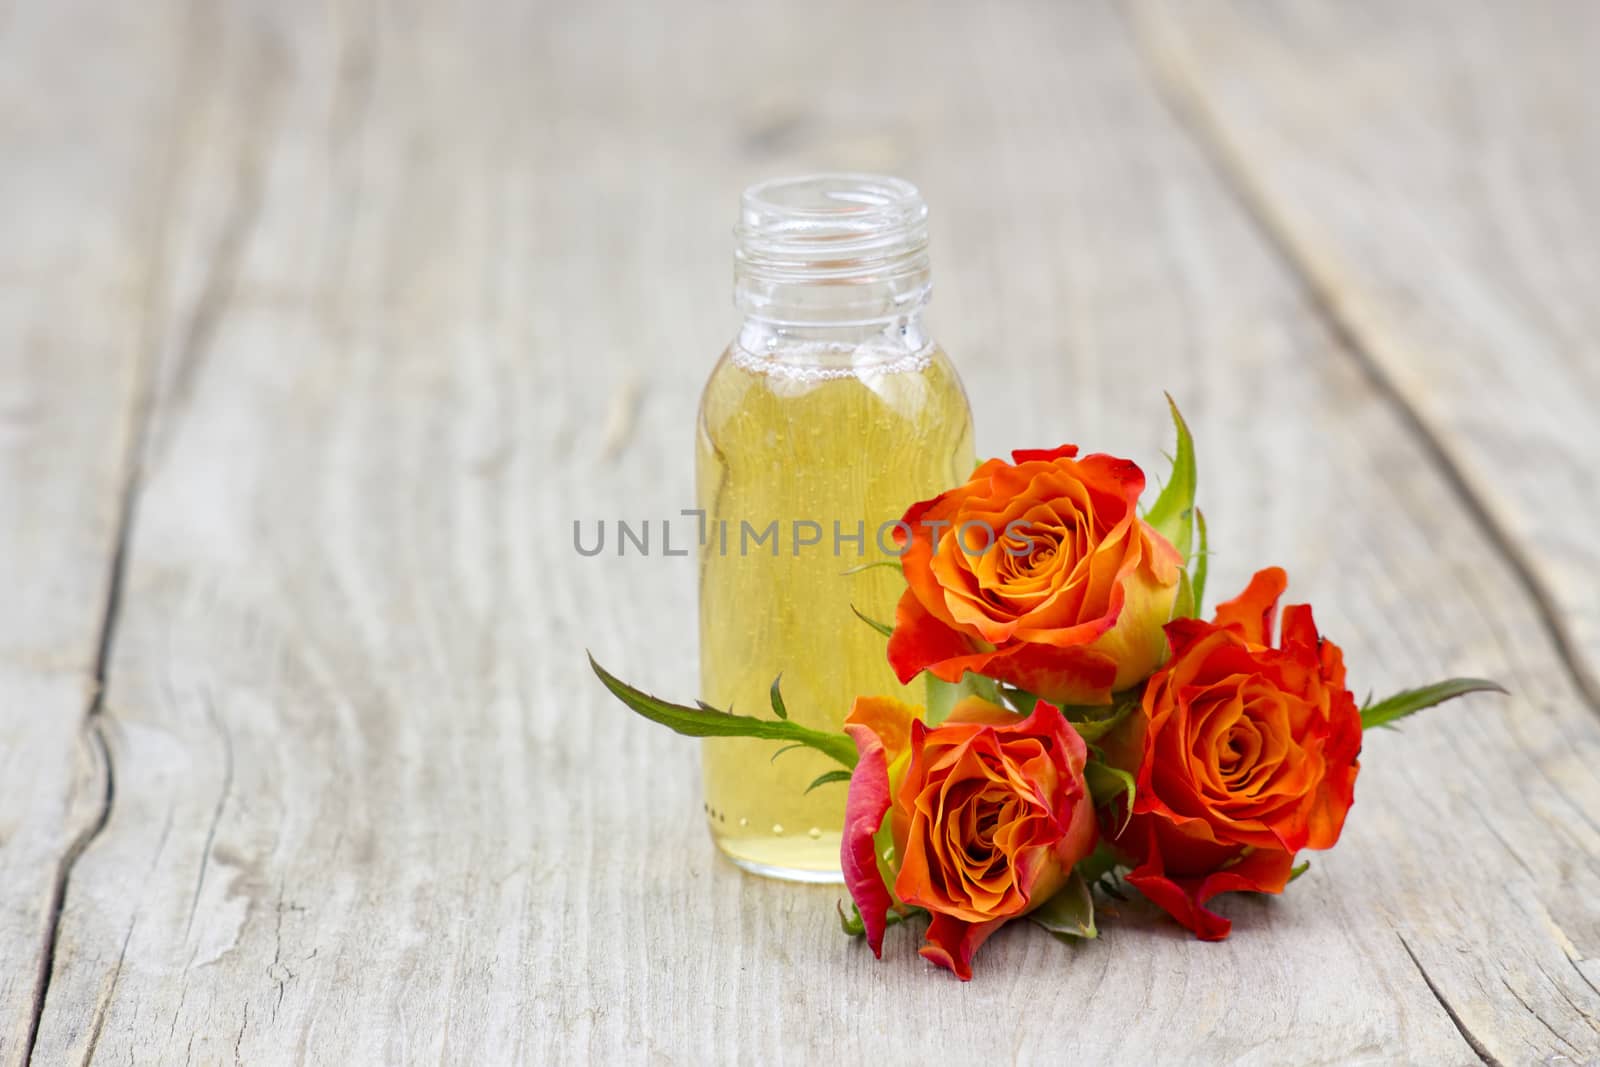 bath oil and orange roses on old wooden background